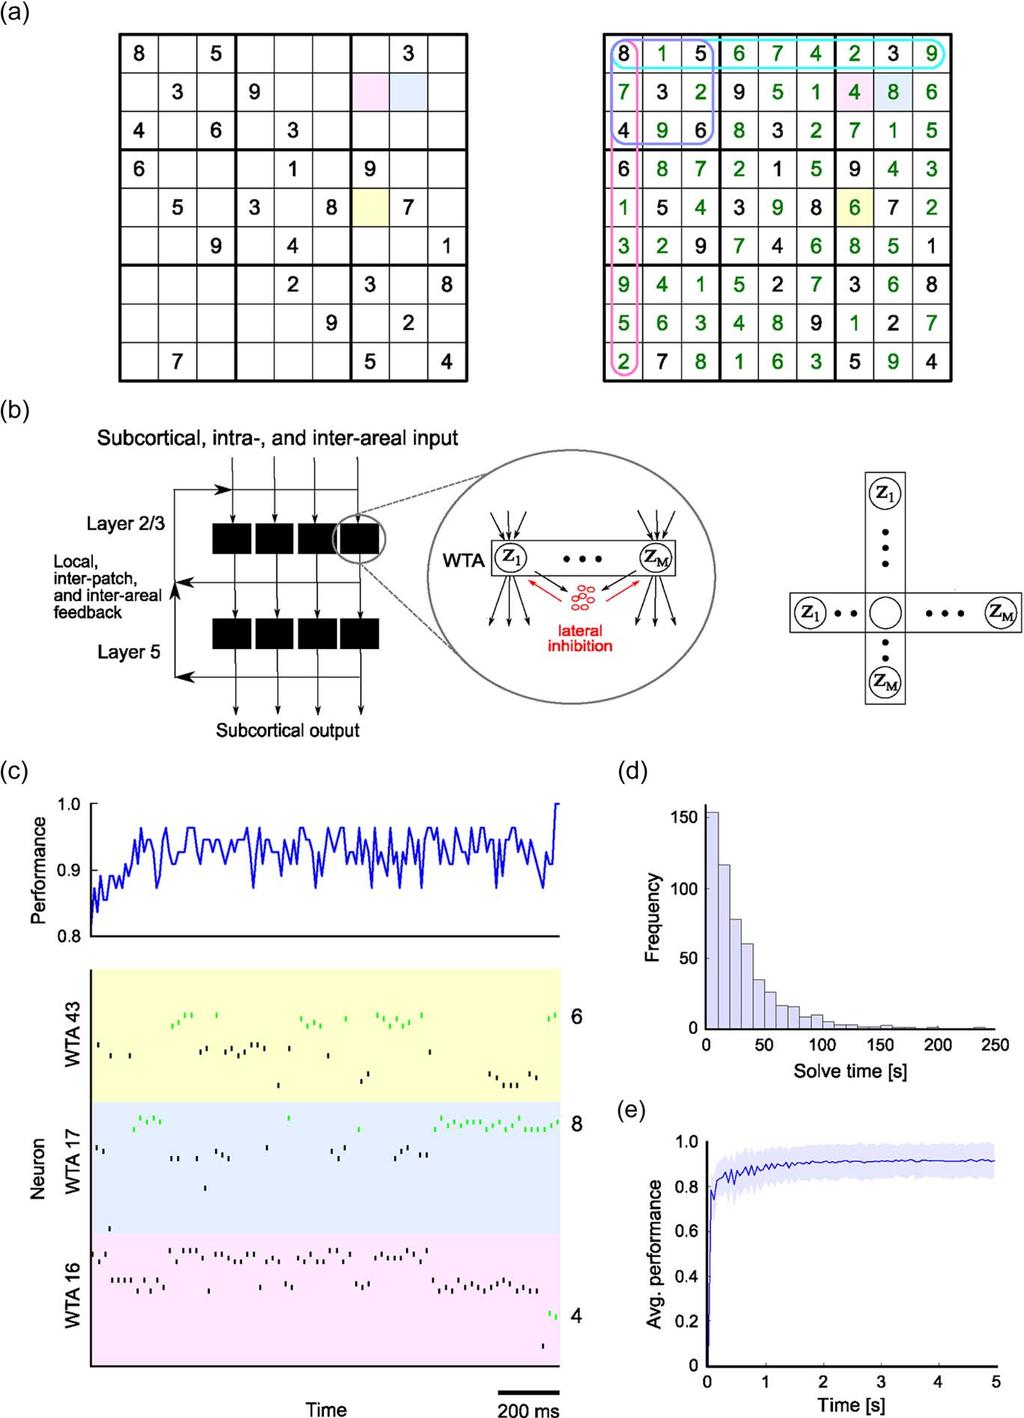 Fig. 5. Solving Sudoku, a constraint satisfaction problem, through structured interactions between stochastically firing excitatory and inhibitory neurons.